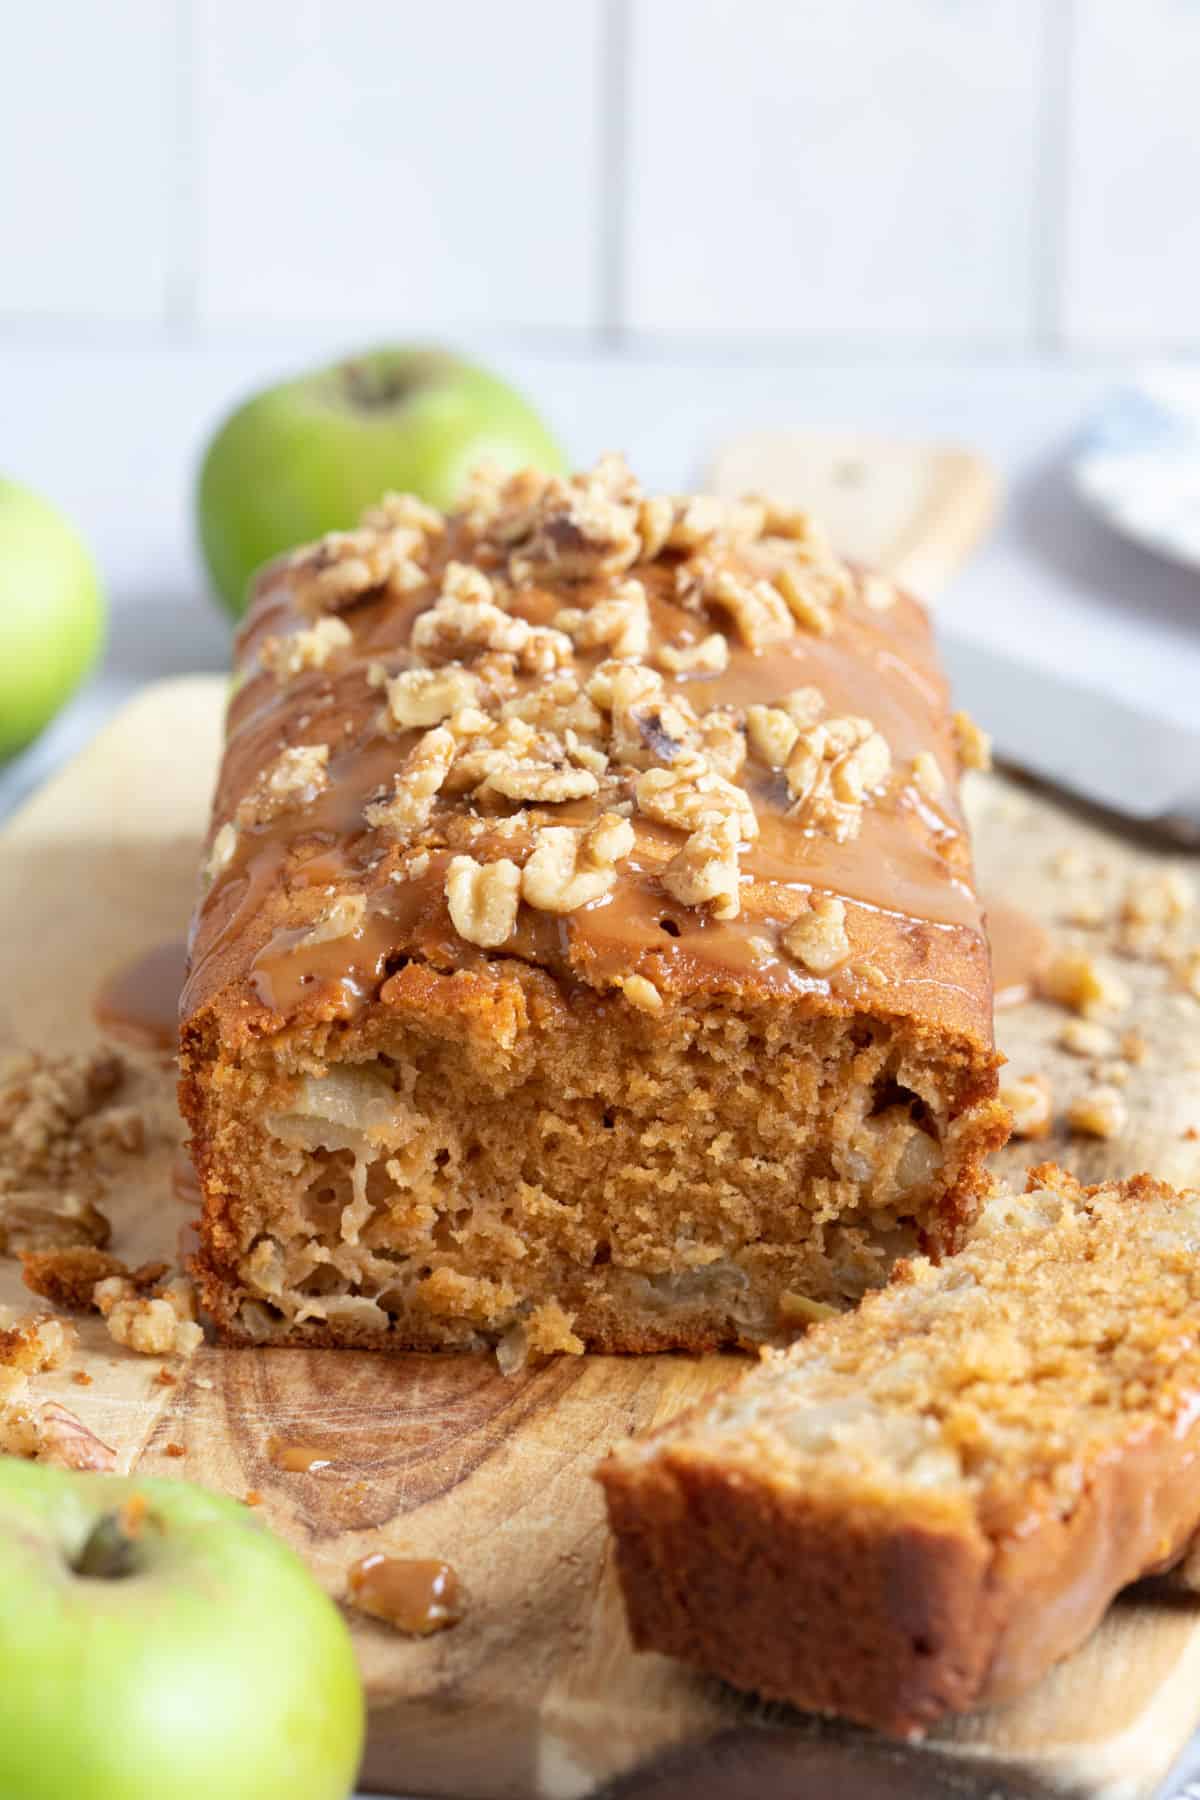 Bramley apple loaf cake with a caramel drizzle.